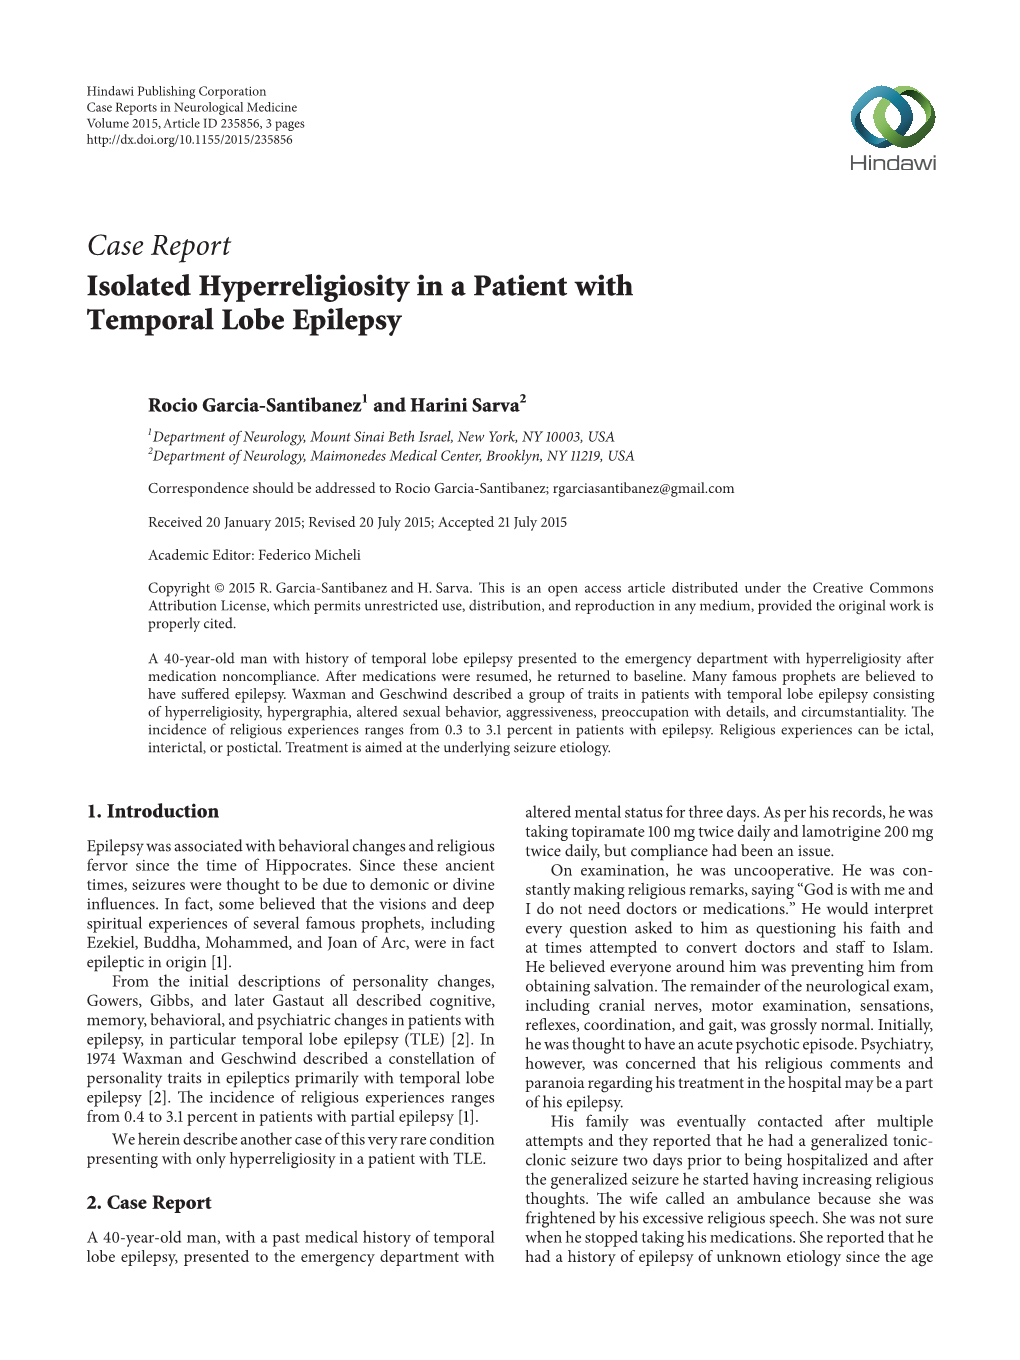 Isolated Hyperreligiosity in a Patient with Temporal Lobe Epilepsy